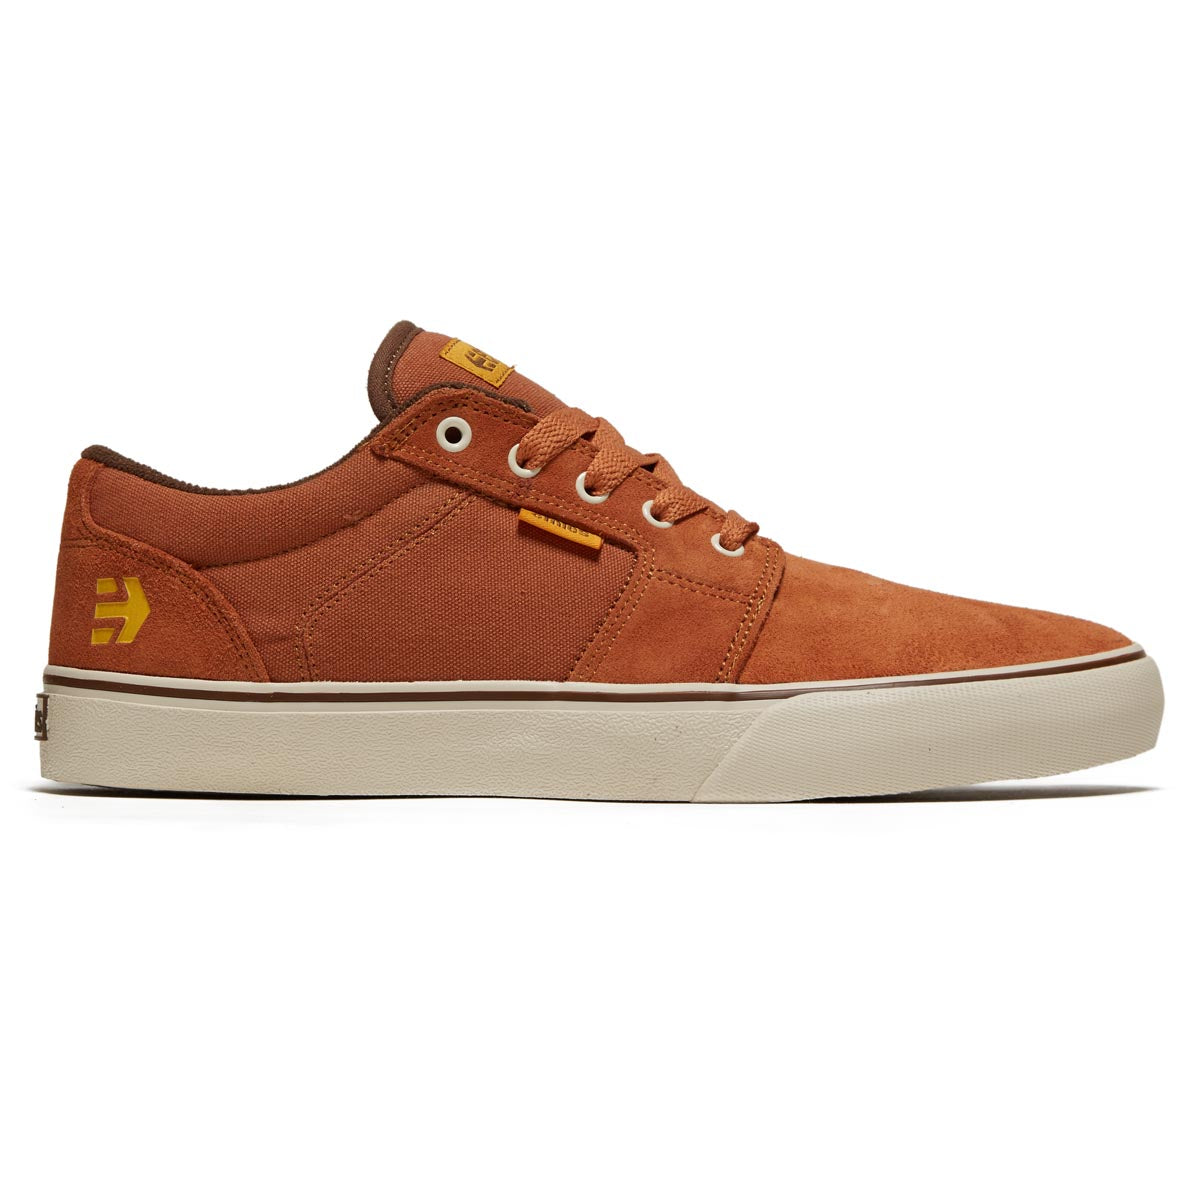 Etnies Barge Ls Shoes - Brown/Gold/Yellow image 1